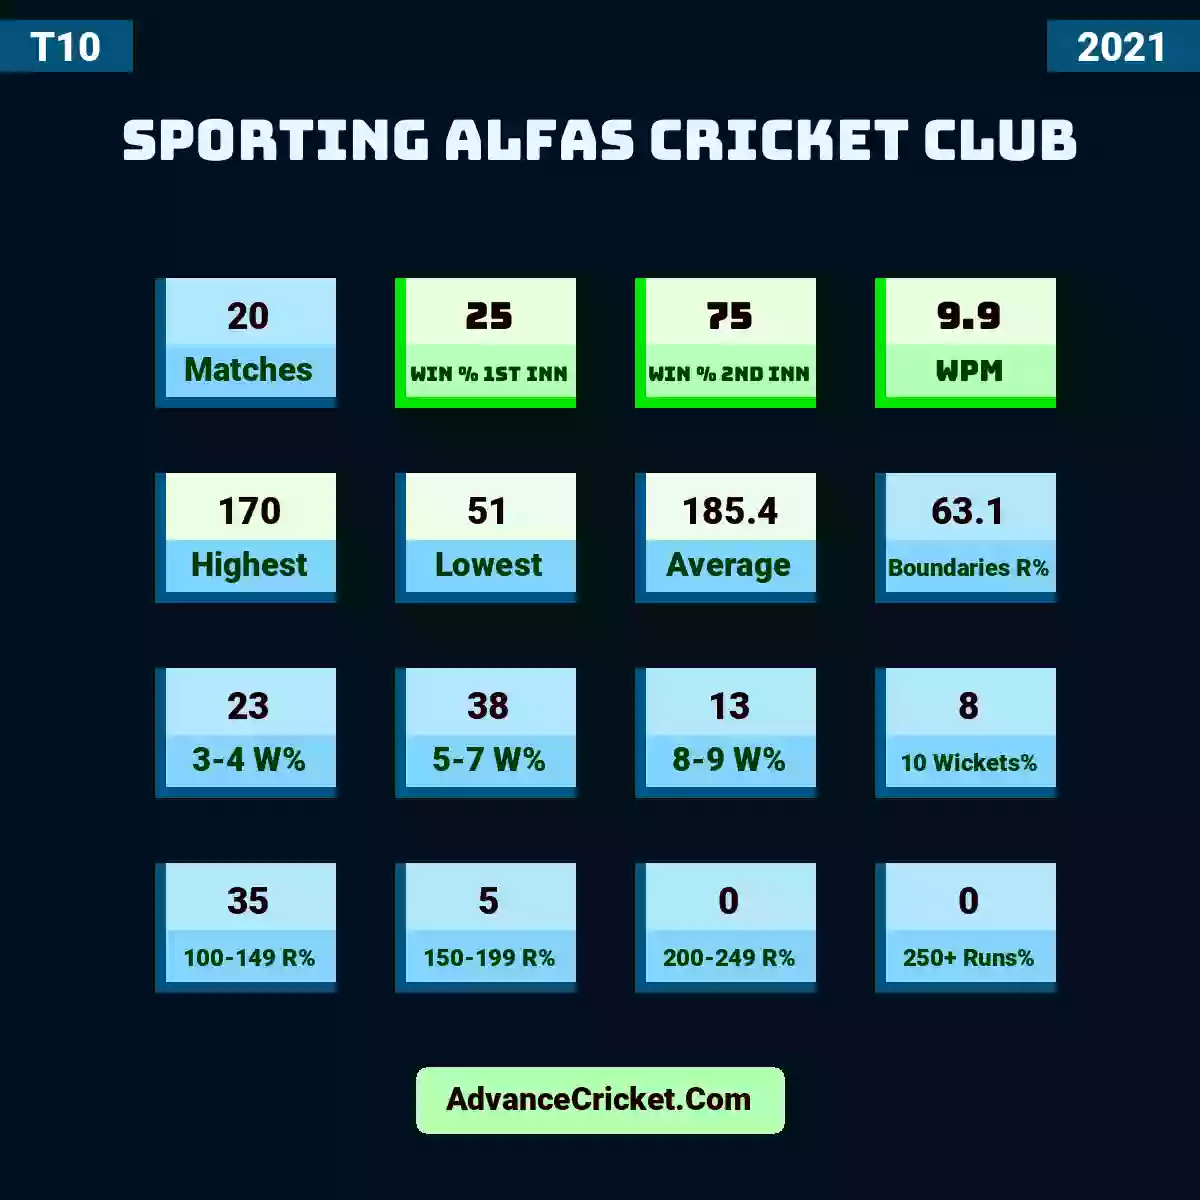 Image showing Sporting Alfas Cricket Club with Matches: 20, Win % 1st Inn: 25, Win % 2nd Inn: 75, WPM: 9.9, Highest: 170, Lowest: 51, Average: 185.4, Boundaries R%: 63.1, 3-4 W%: 23, 5-7 W%: 38, 8-9 W%: 13, 10 Wickets%: 8, 100-149 R%: 35, 150-199 R%: 5, 200-249 R%: 0, 250+ Runs%: 0.